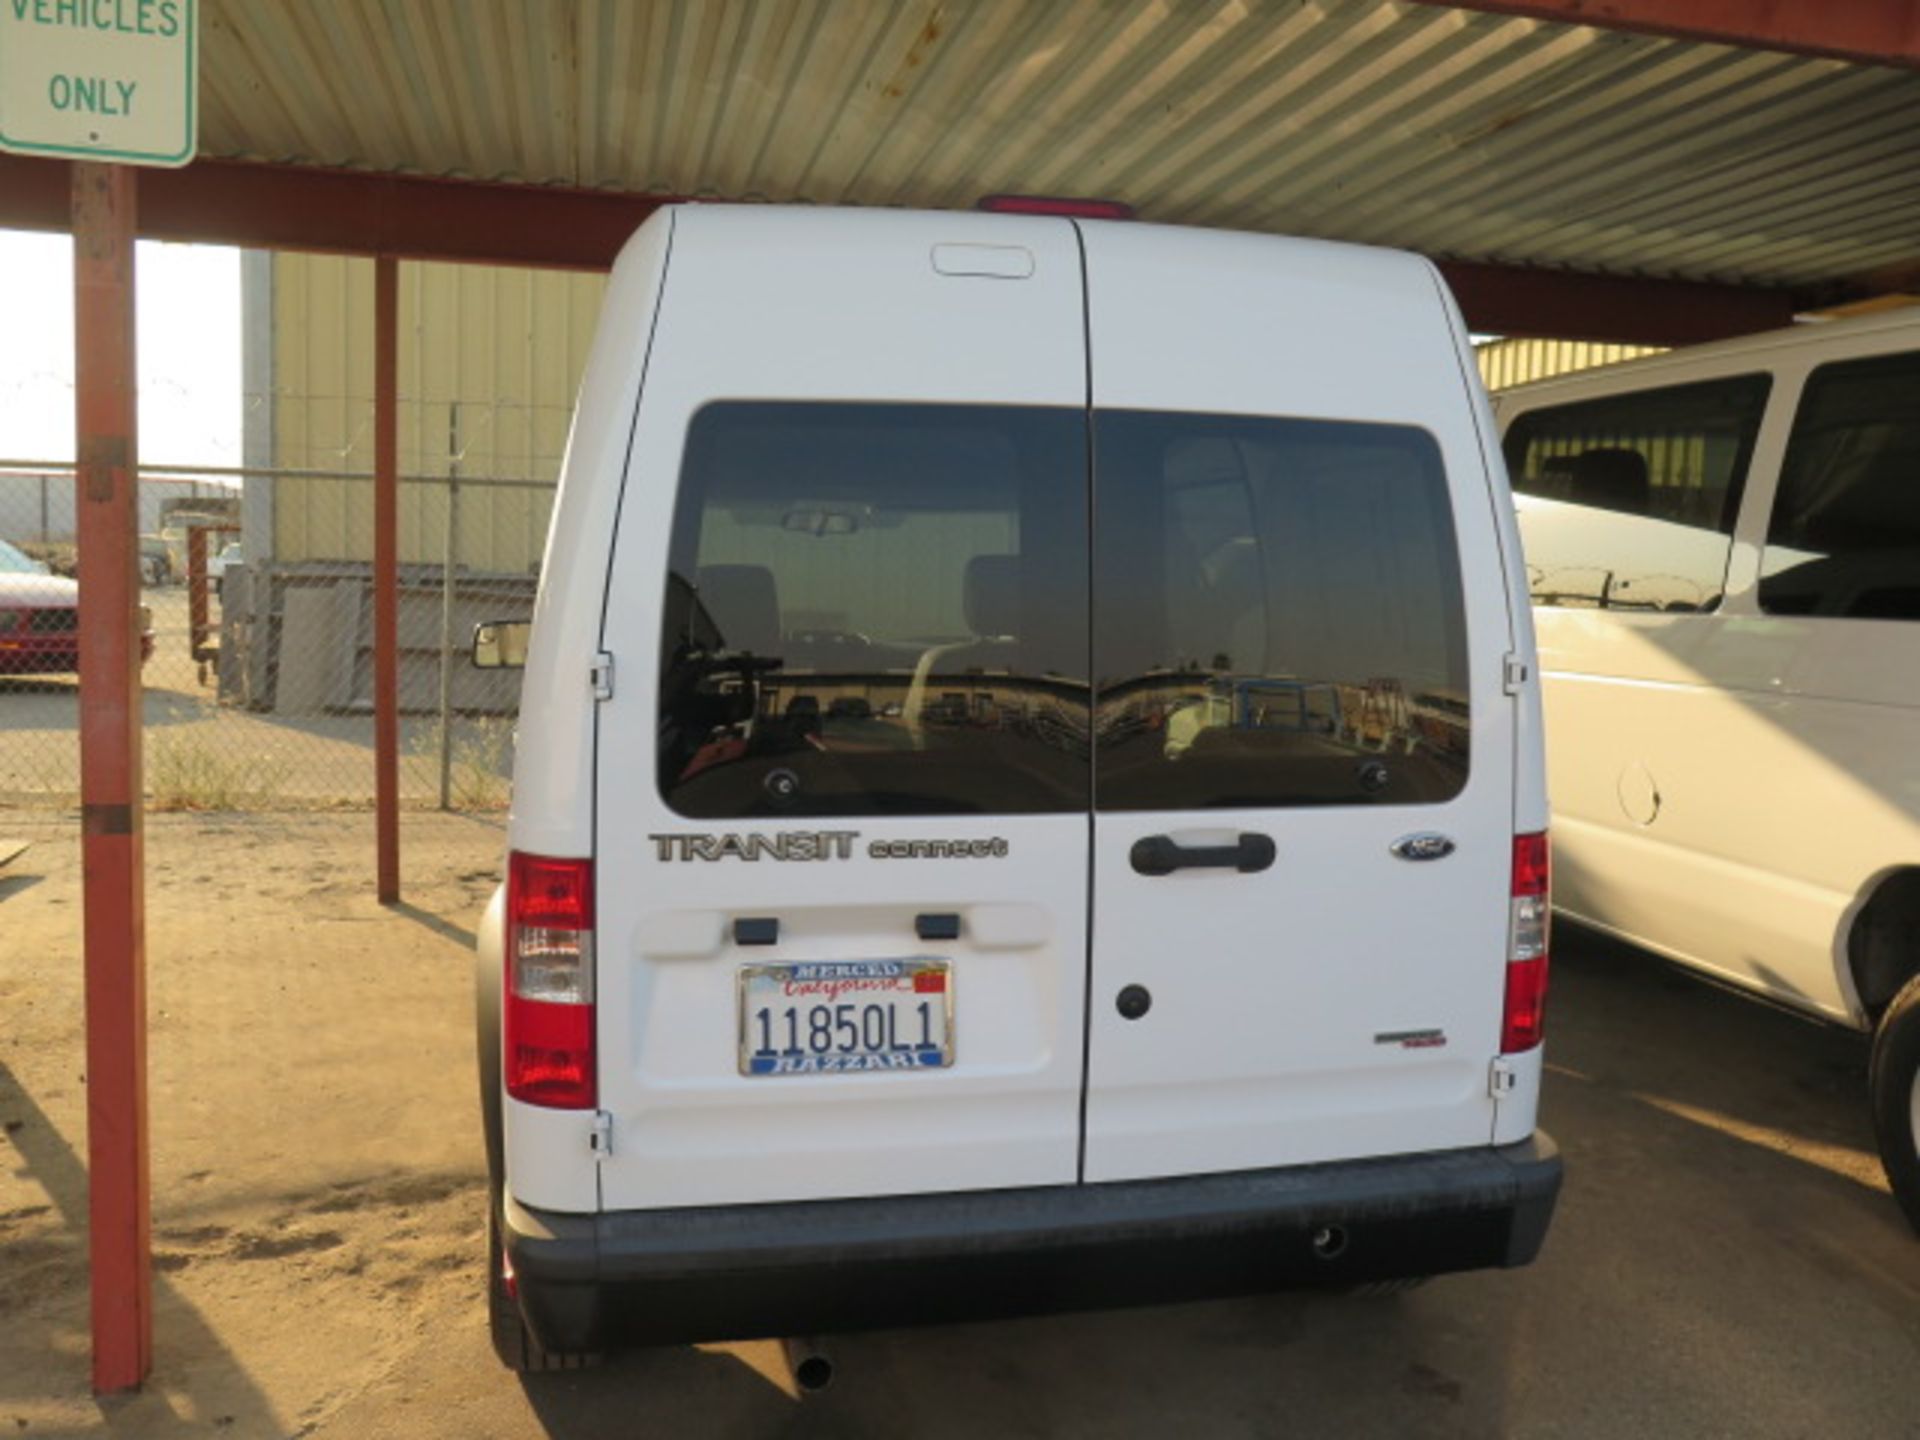 2013 Ford Transit Connect Van Lisc# 11850L1, Gas Engine, Auto Trans, AC, 249,936 Miles, SOLD AS IS - Image 5 of 19